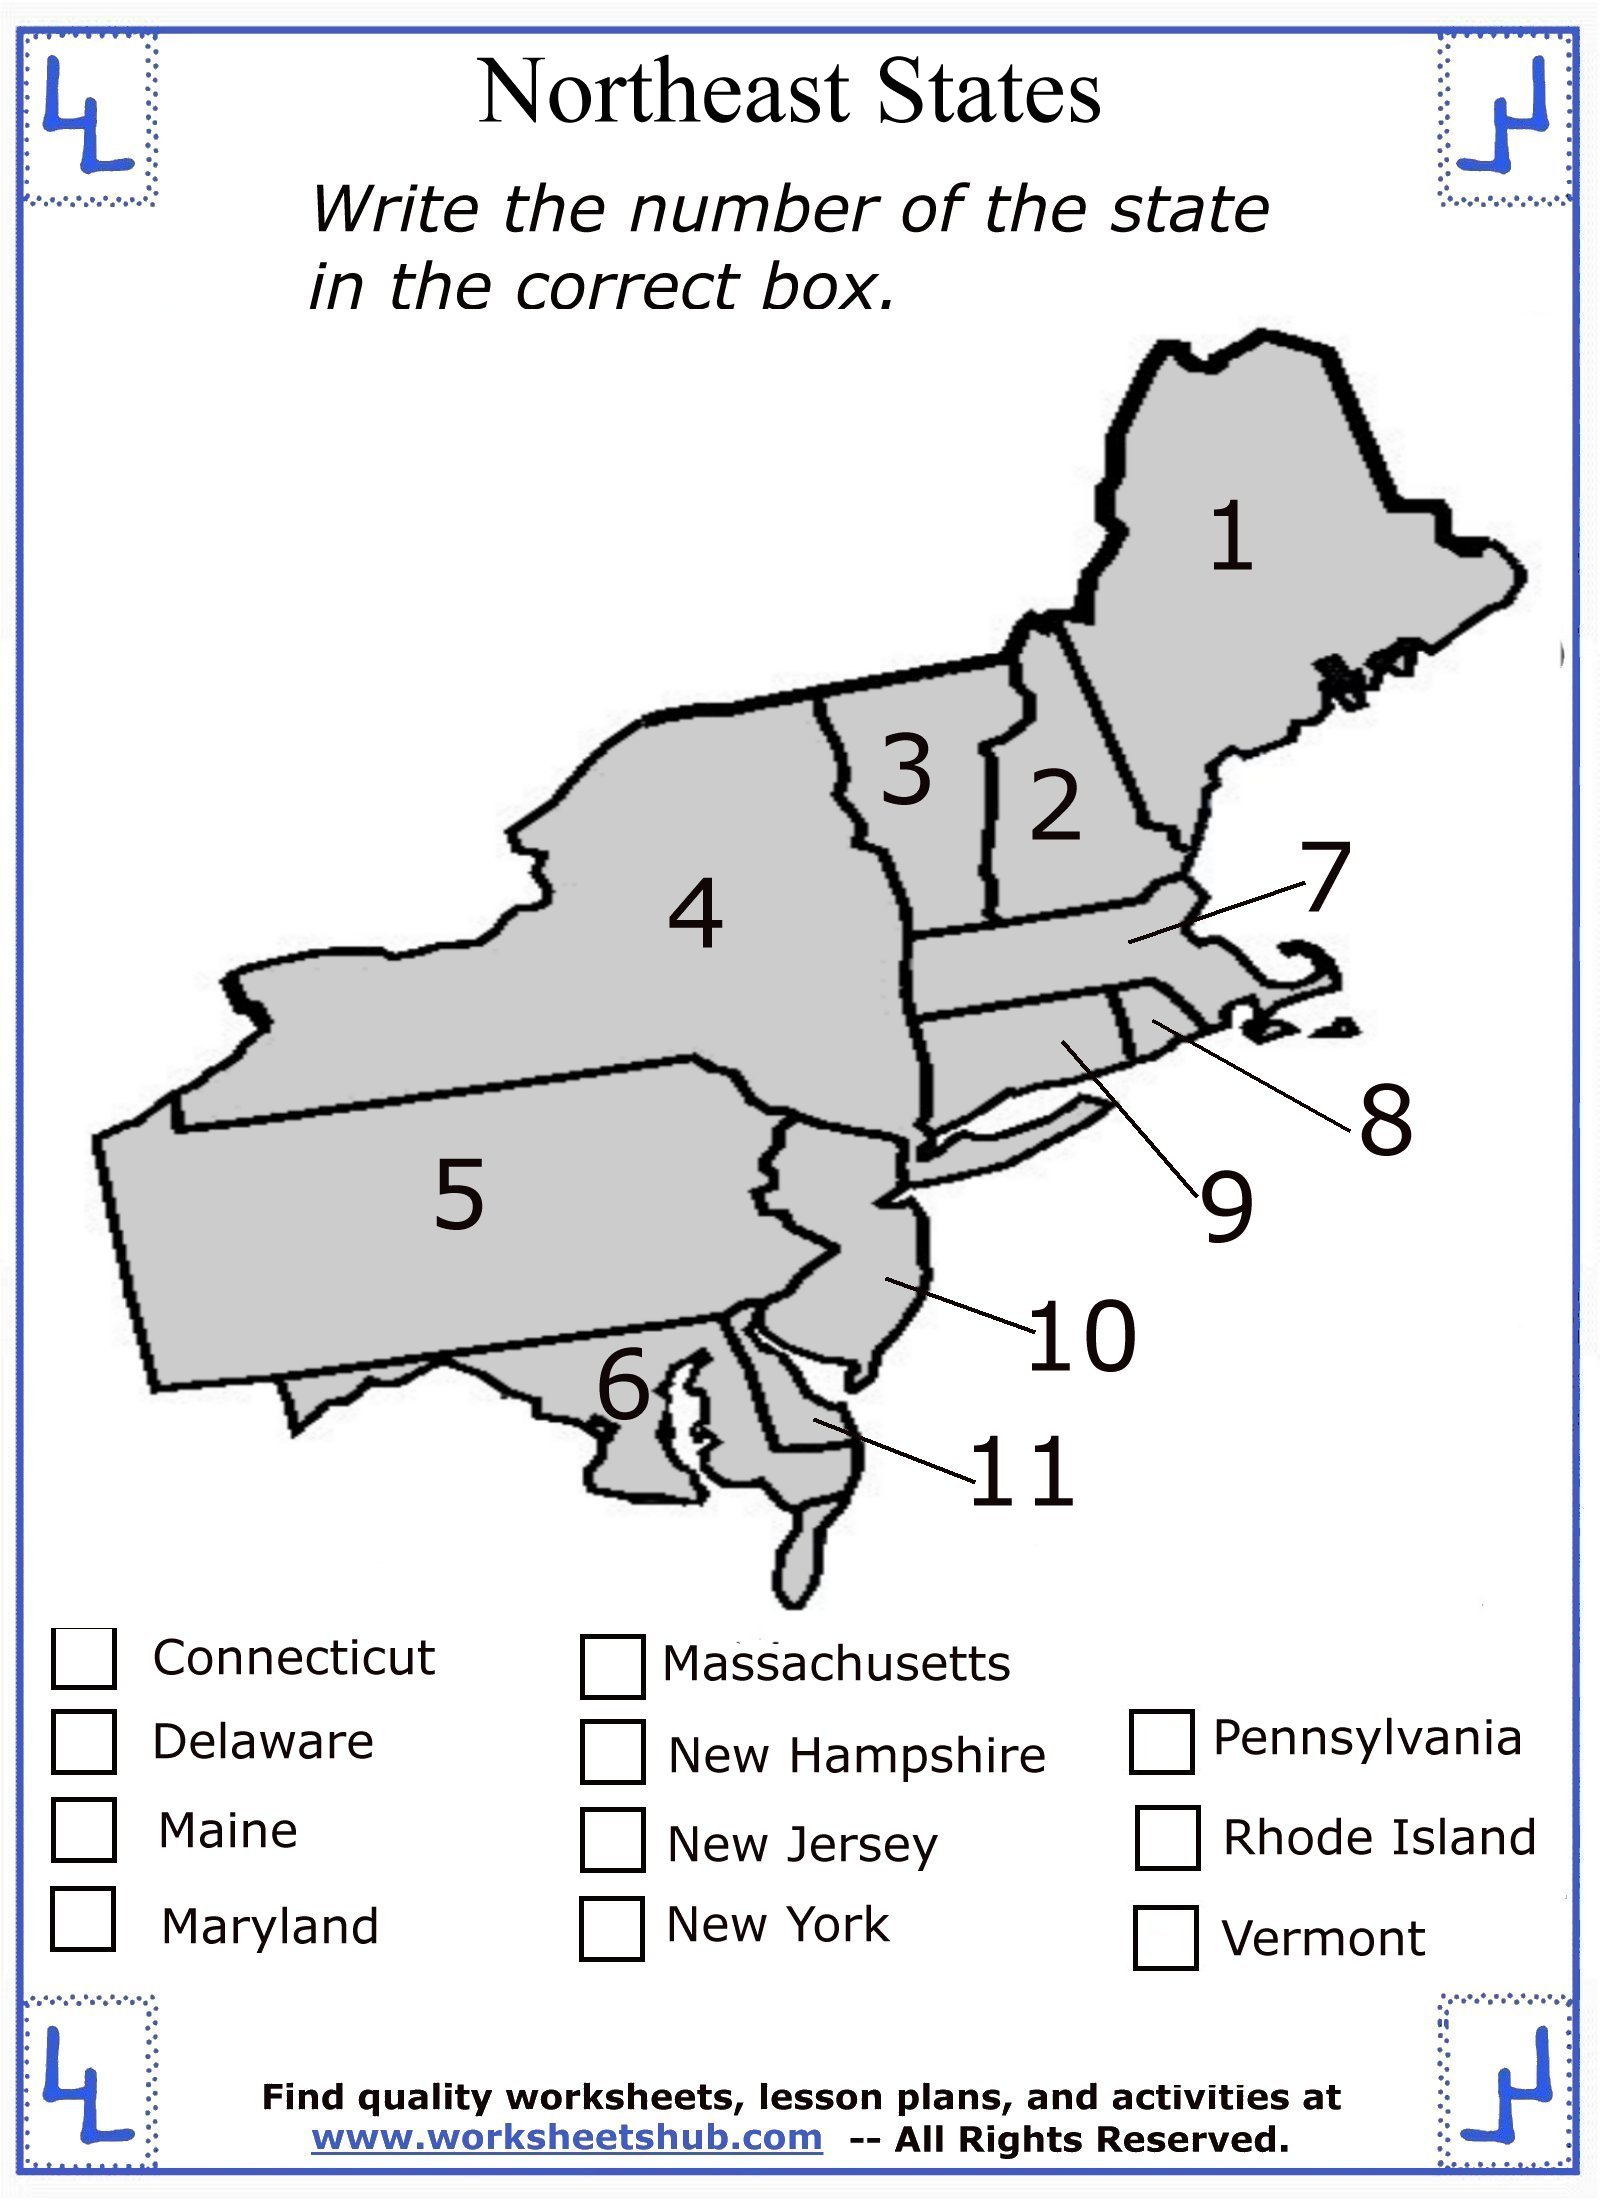 northeast-states-and-capitals-quiz-free-printable-printable-form